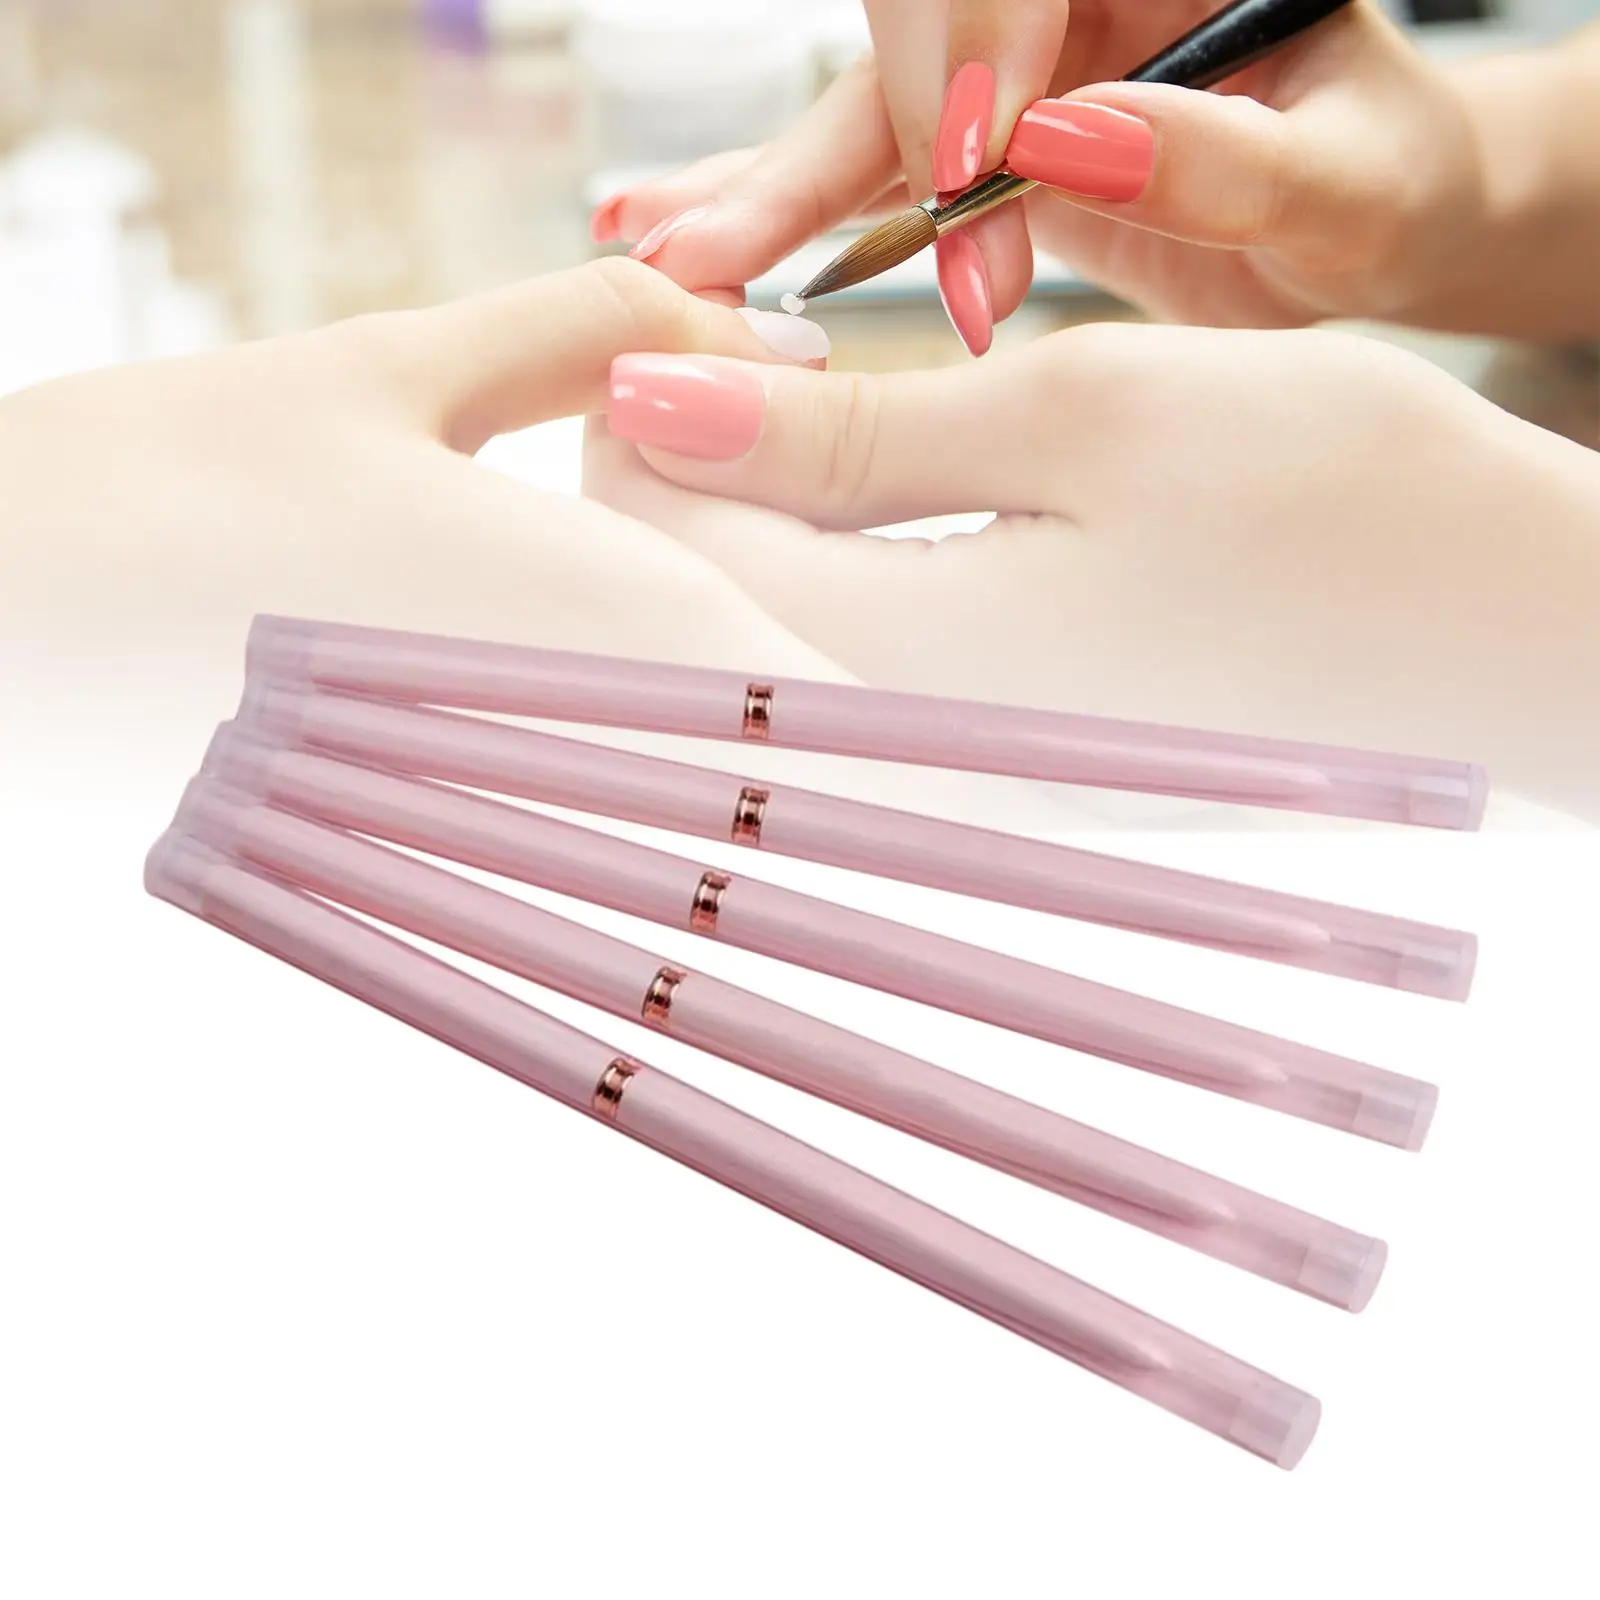 5Pcs Nail Art Brushes Set 4 mm-25mm Nail Drawing Pens for Elongated Lines DIY Professional Design Thin Details Delicate Coloring